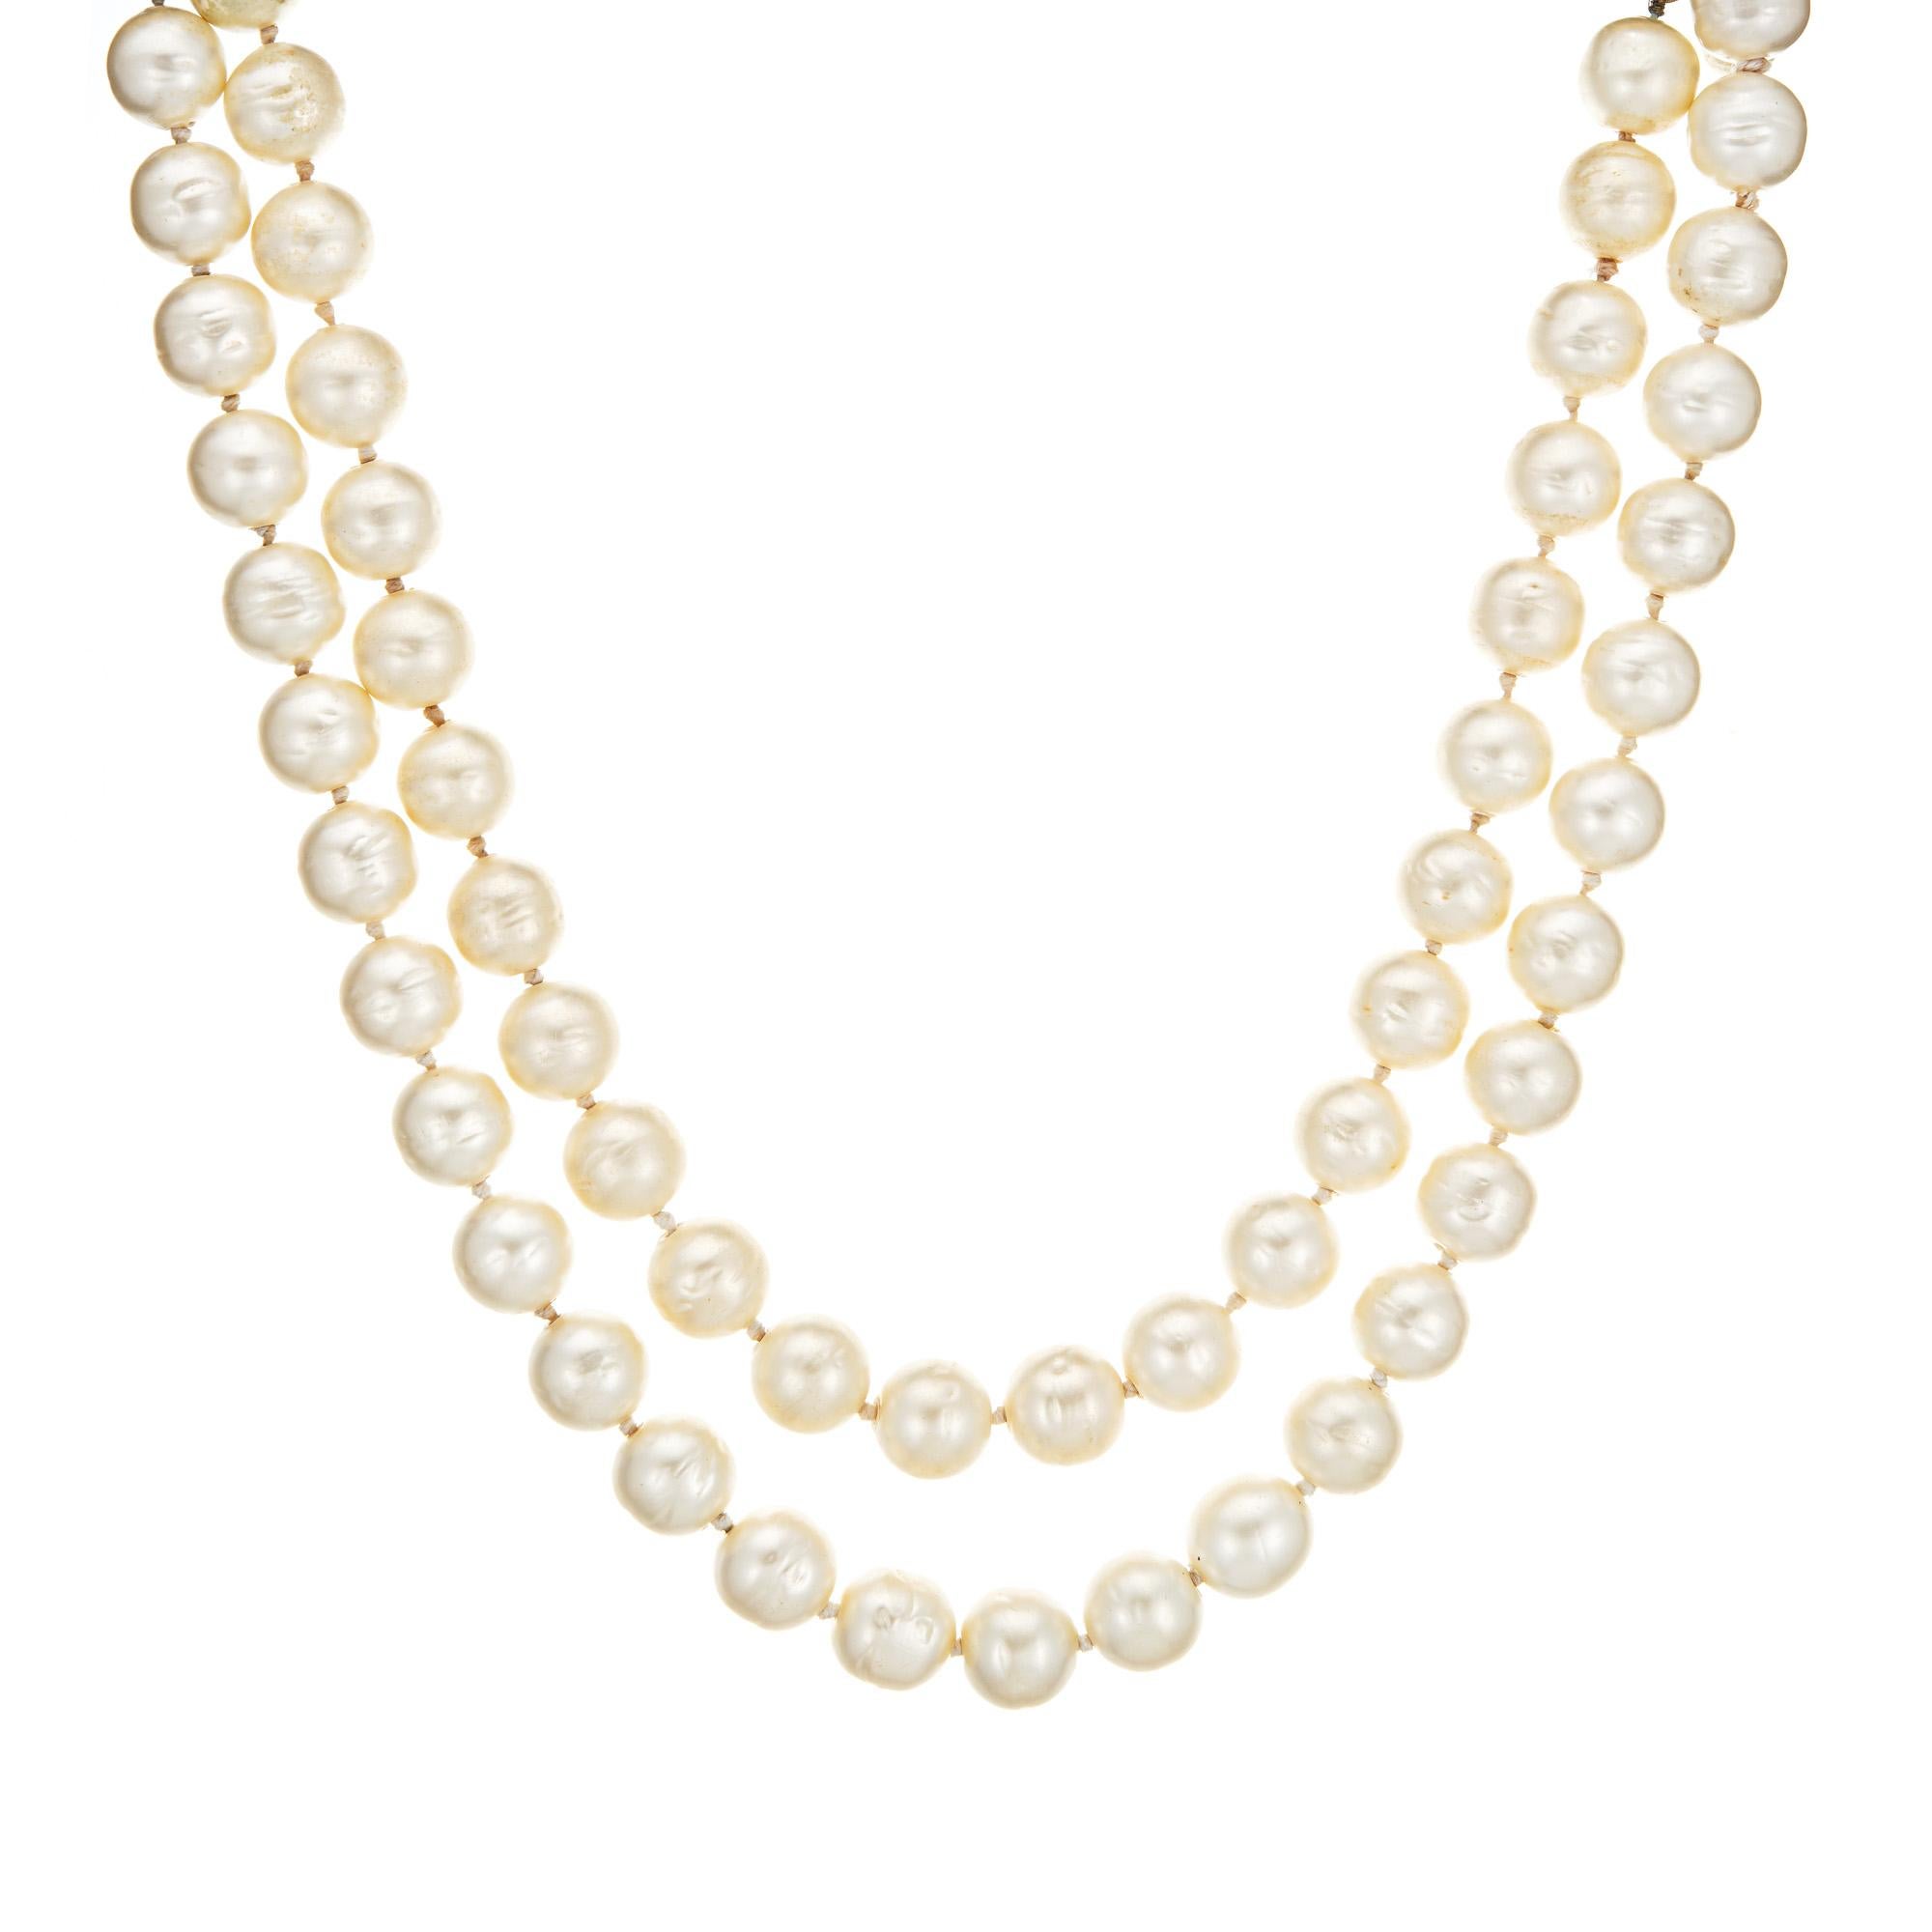 Round Cut 1995 Vintage Chanel Choker Necklace Double Strand 12mm Faux Pearls Gripoix Clasp For Sale